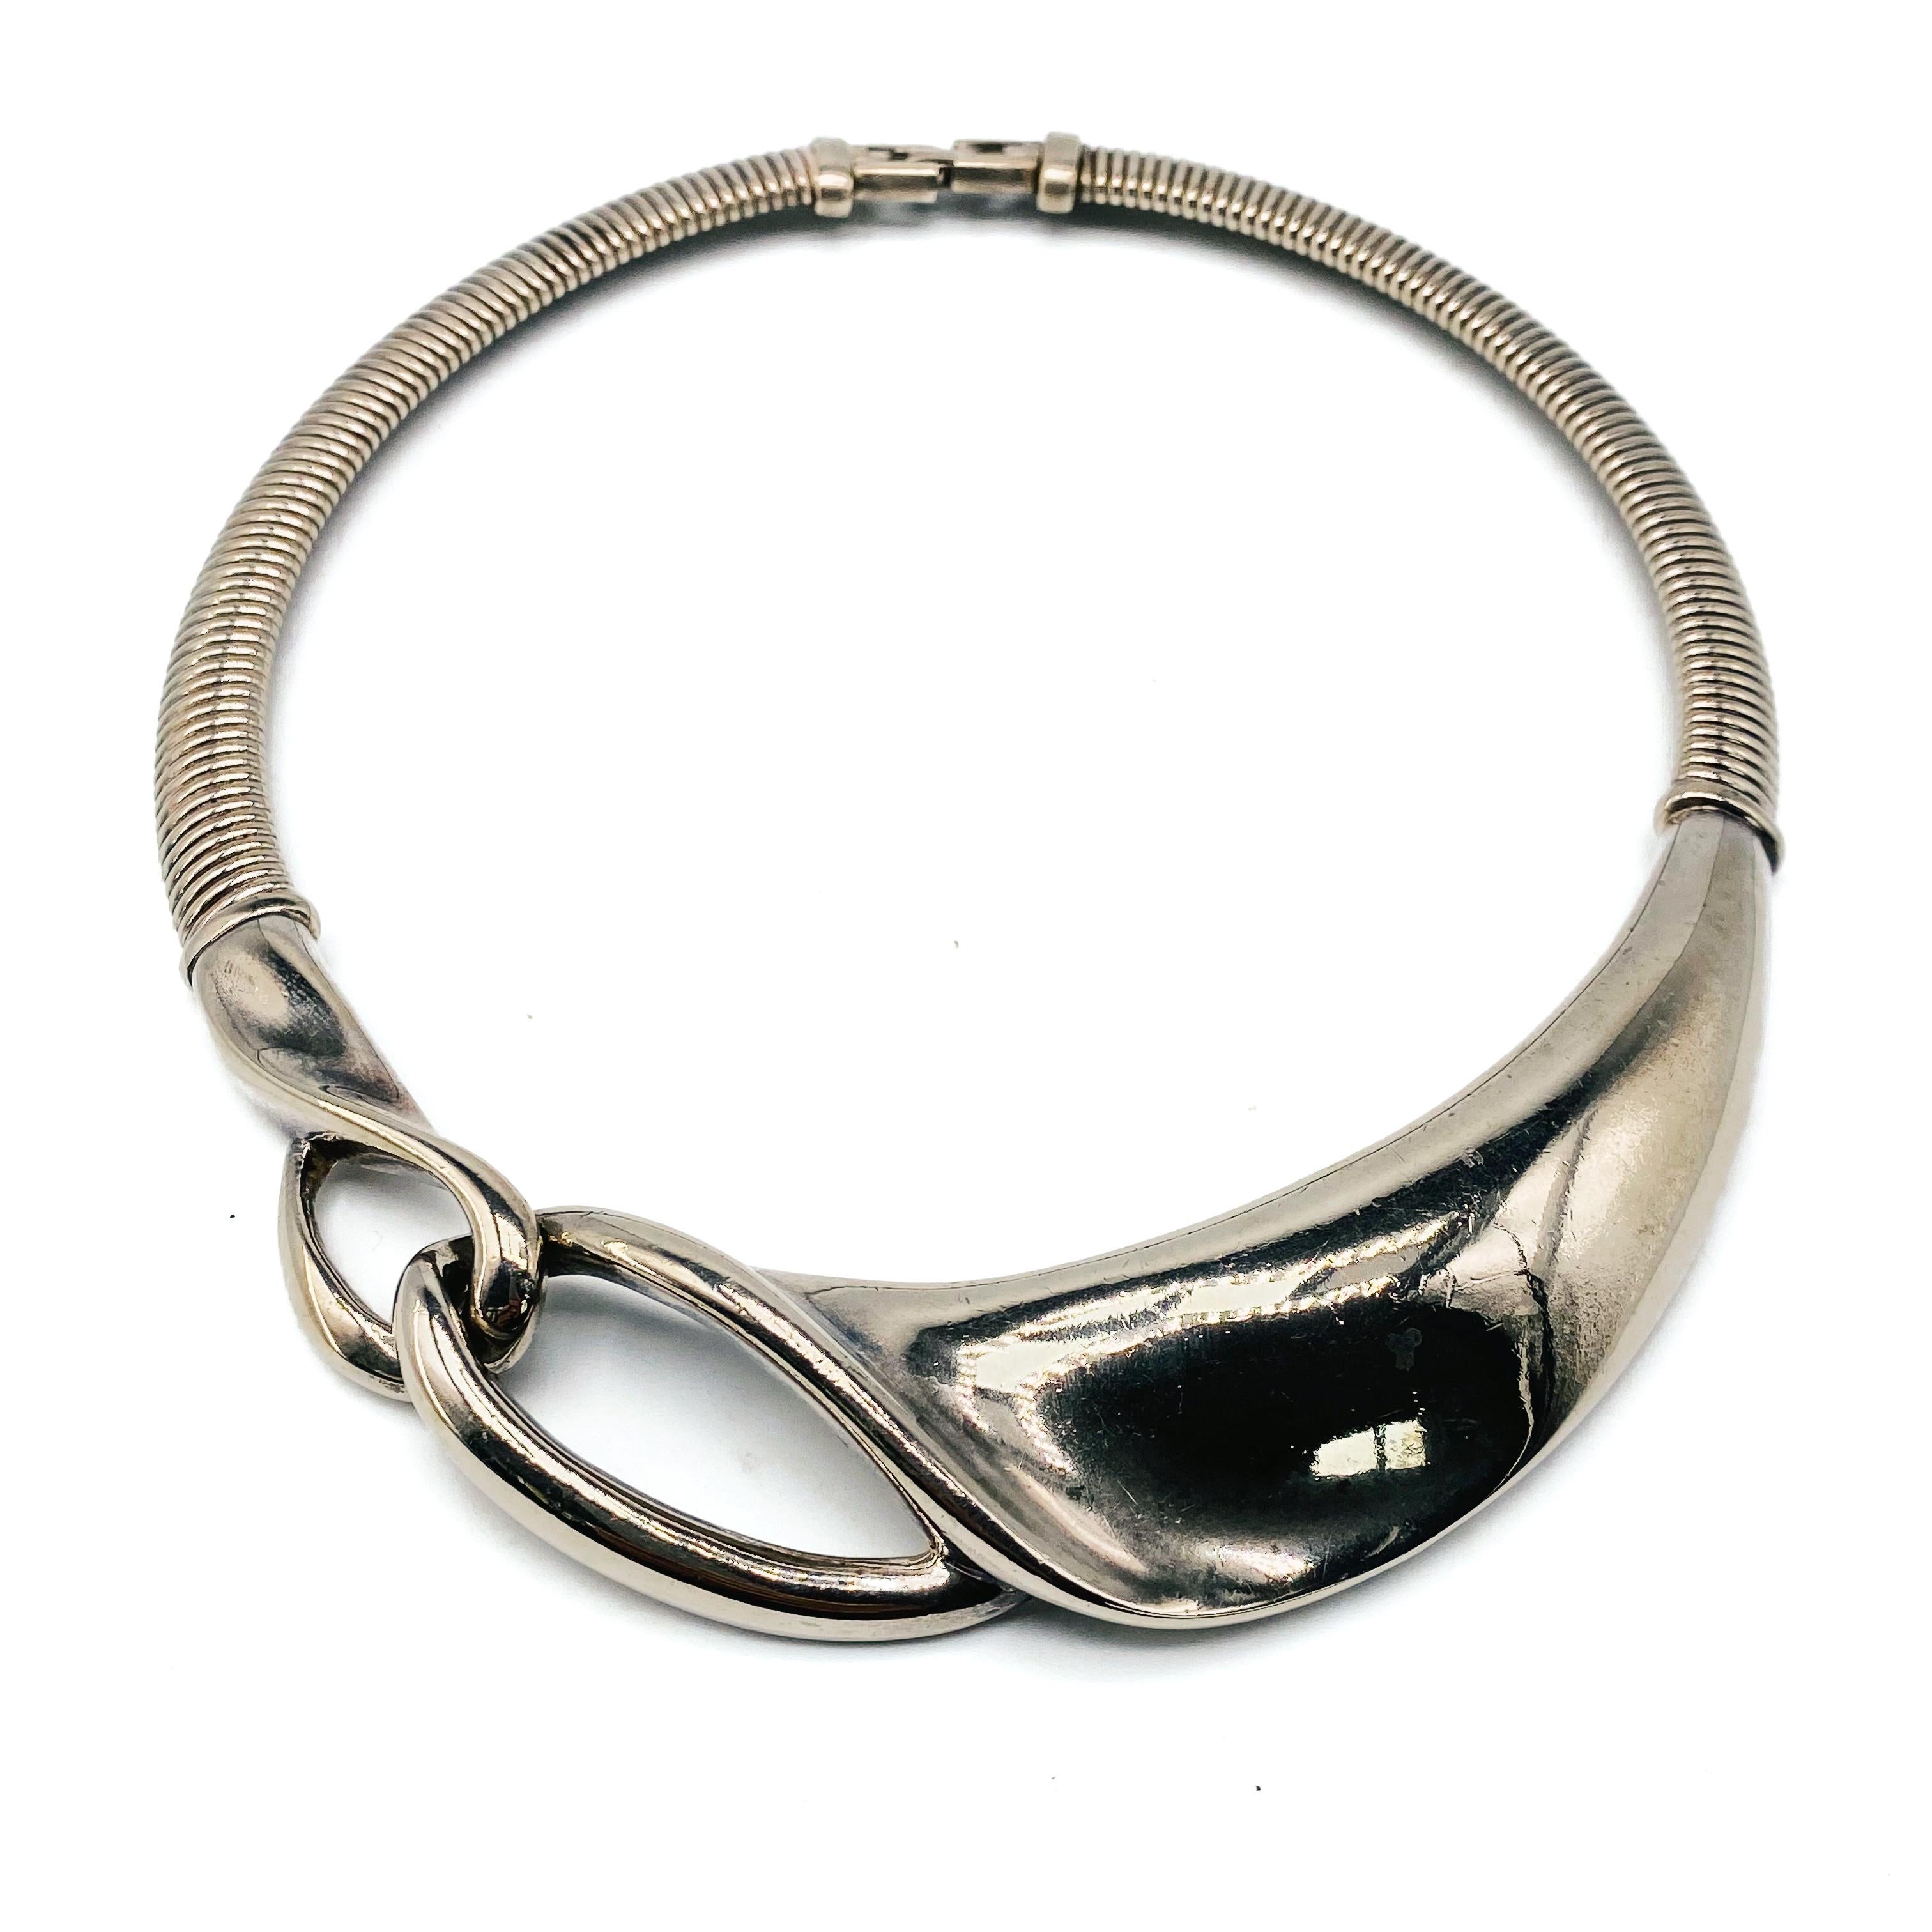 Givenchy Vintage 1980s Collar Necklace

Amazing modernist statement necklace from the iconic house of Hubert de Givenchy. Crafted in the early 80s from silver plated metal. Features a large abstract centrepiece within a chunky articulates snake